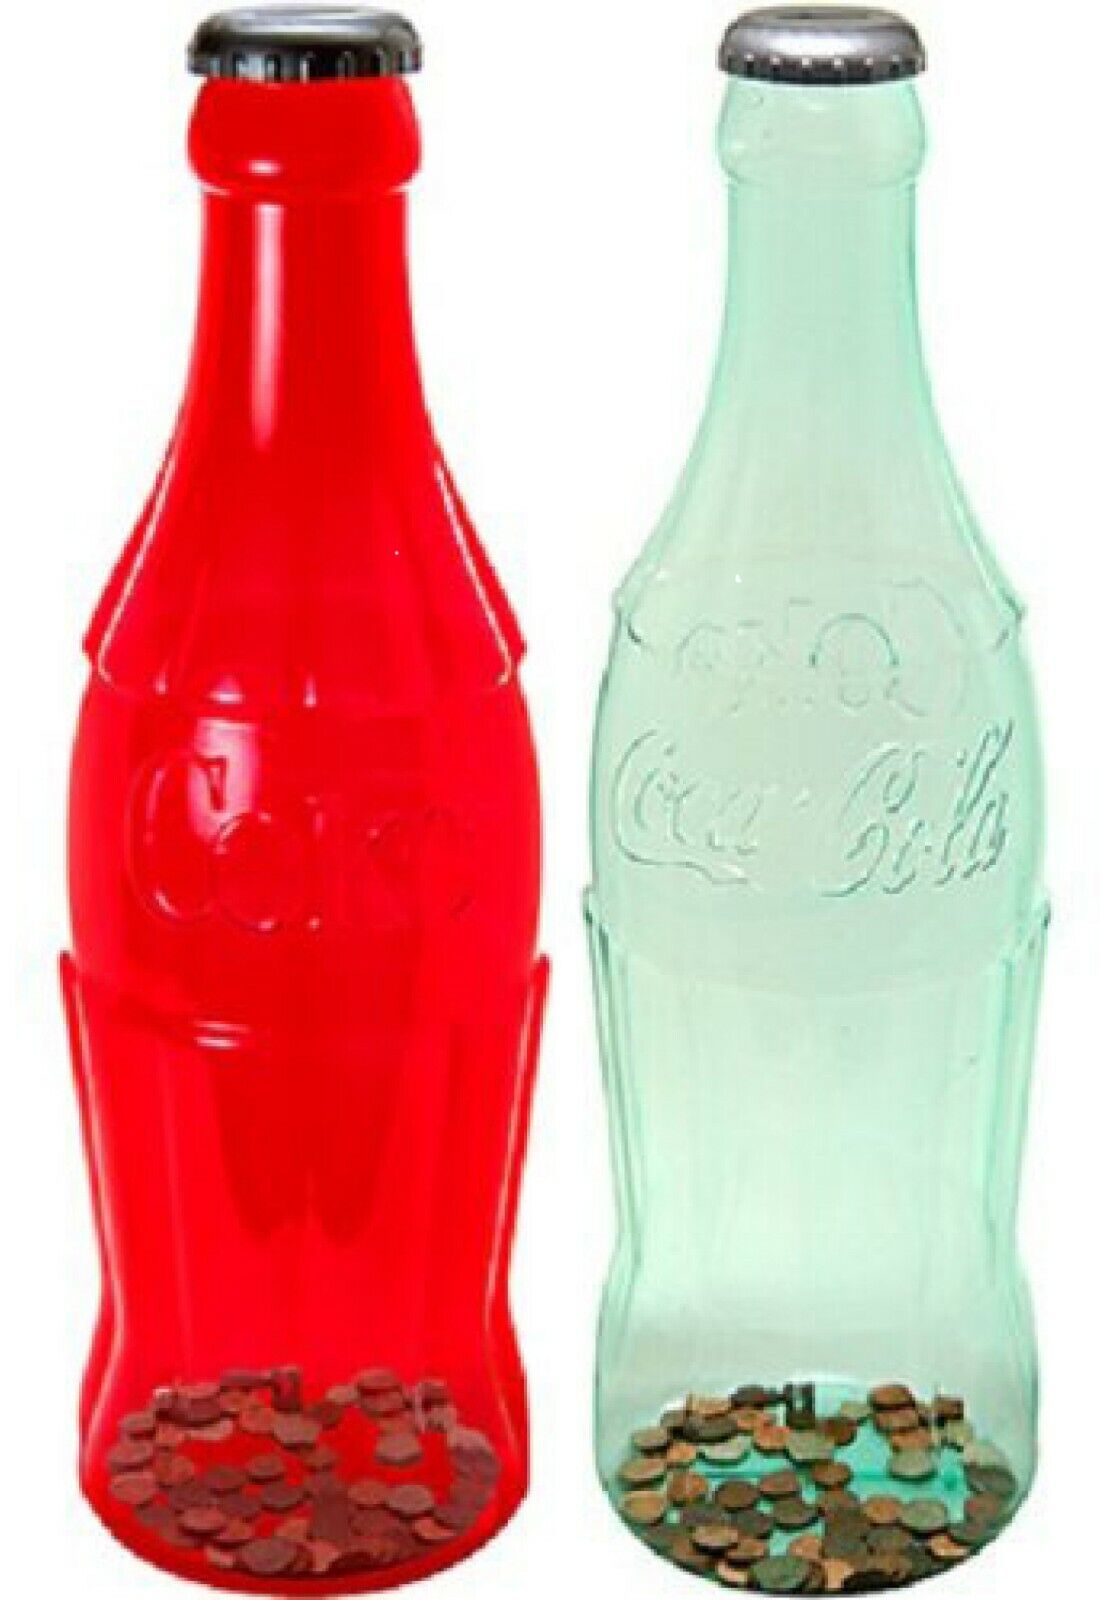 NEW Large 23" Coca Cola Bottle Bank Coins Coke Red or Clear - Free USA Shipping! Coca-Cola - фотография #4